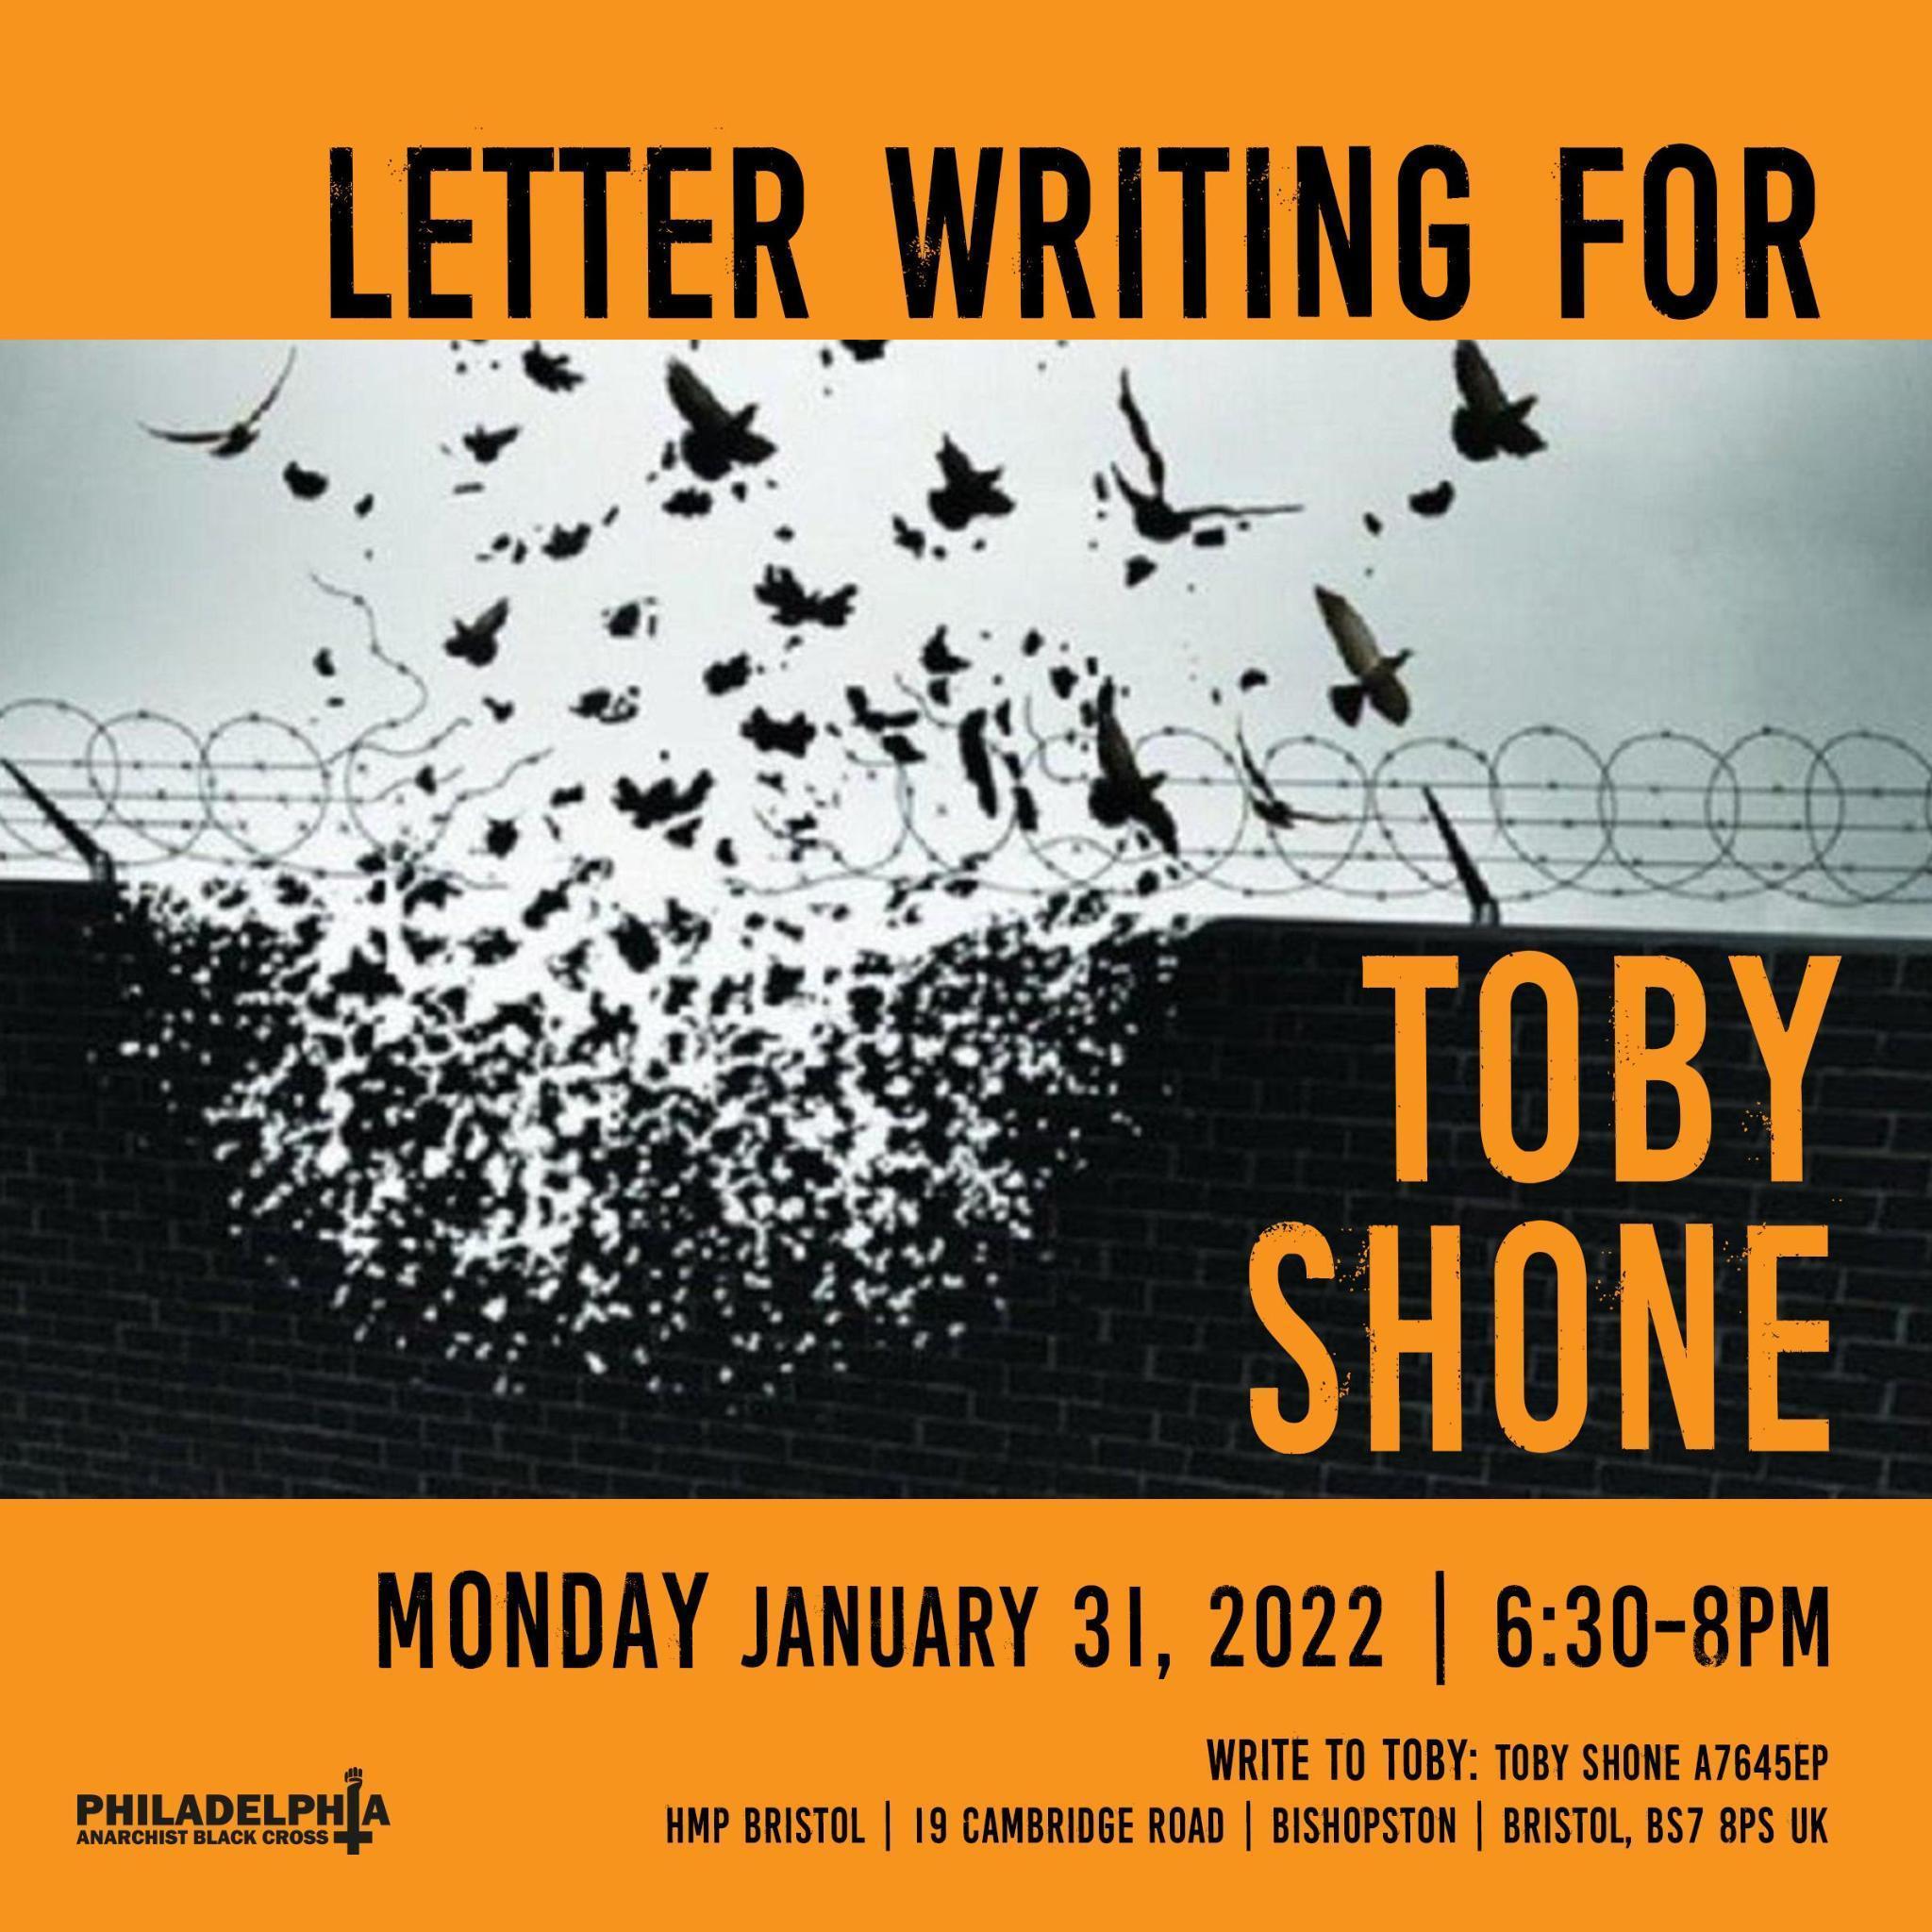 Monday January 31st: Letter-writing for Toby Shone